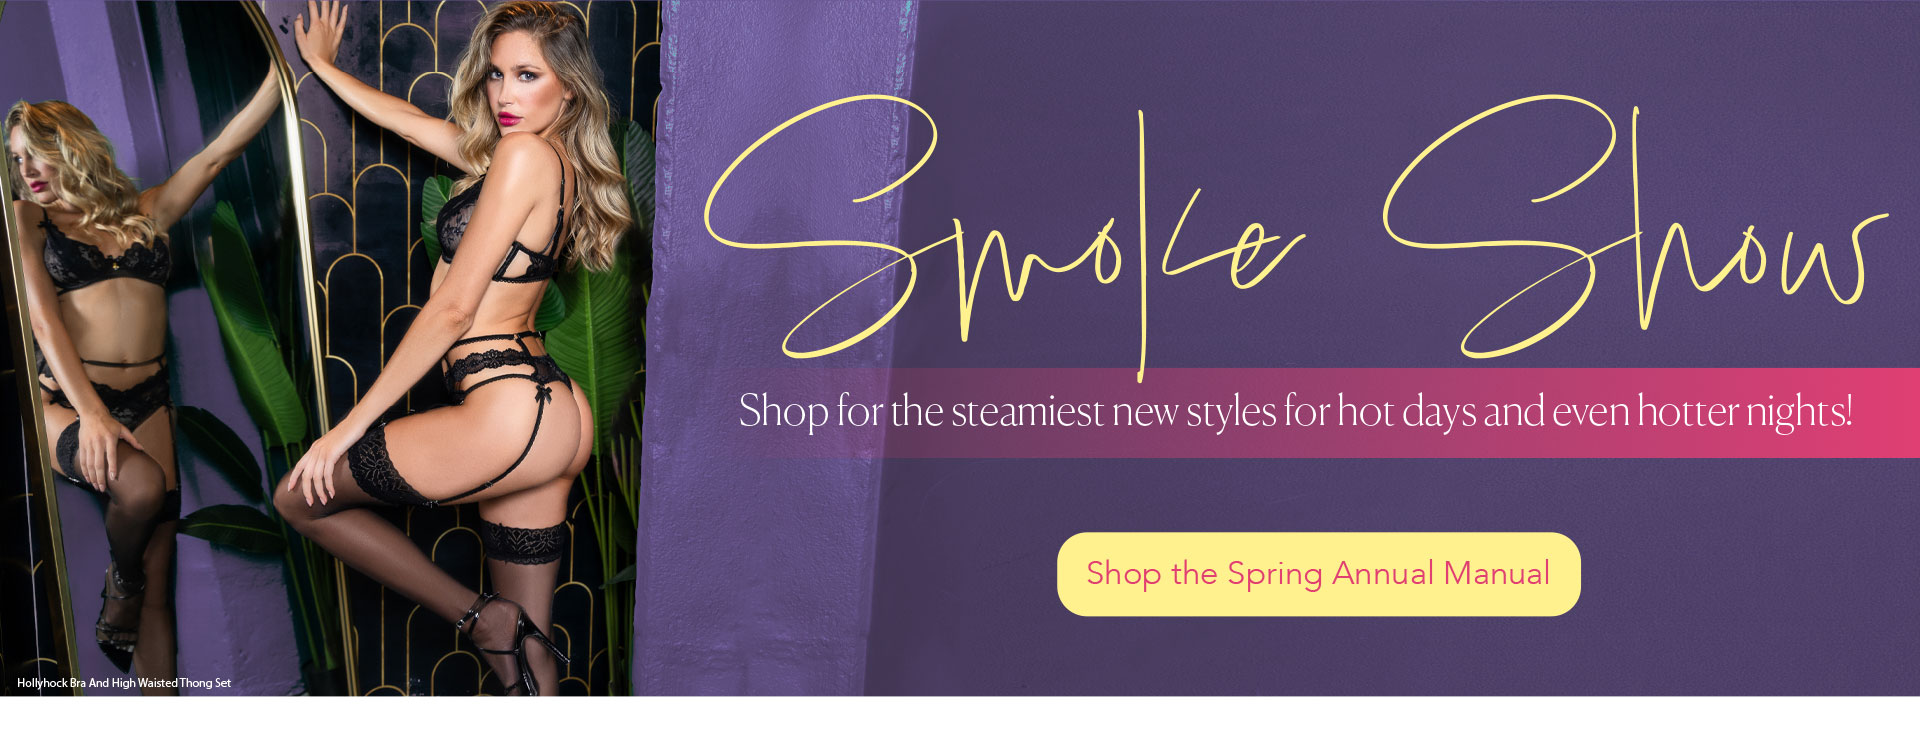 Smoke Show - Shop for the steamiest new styles for hot days and even hotter nights! - Shop the Annual Manual